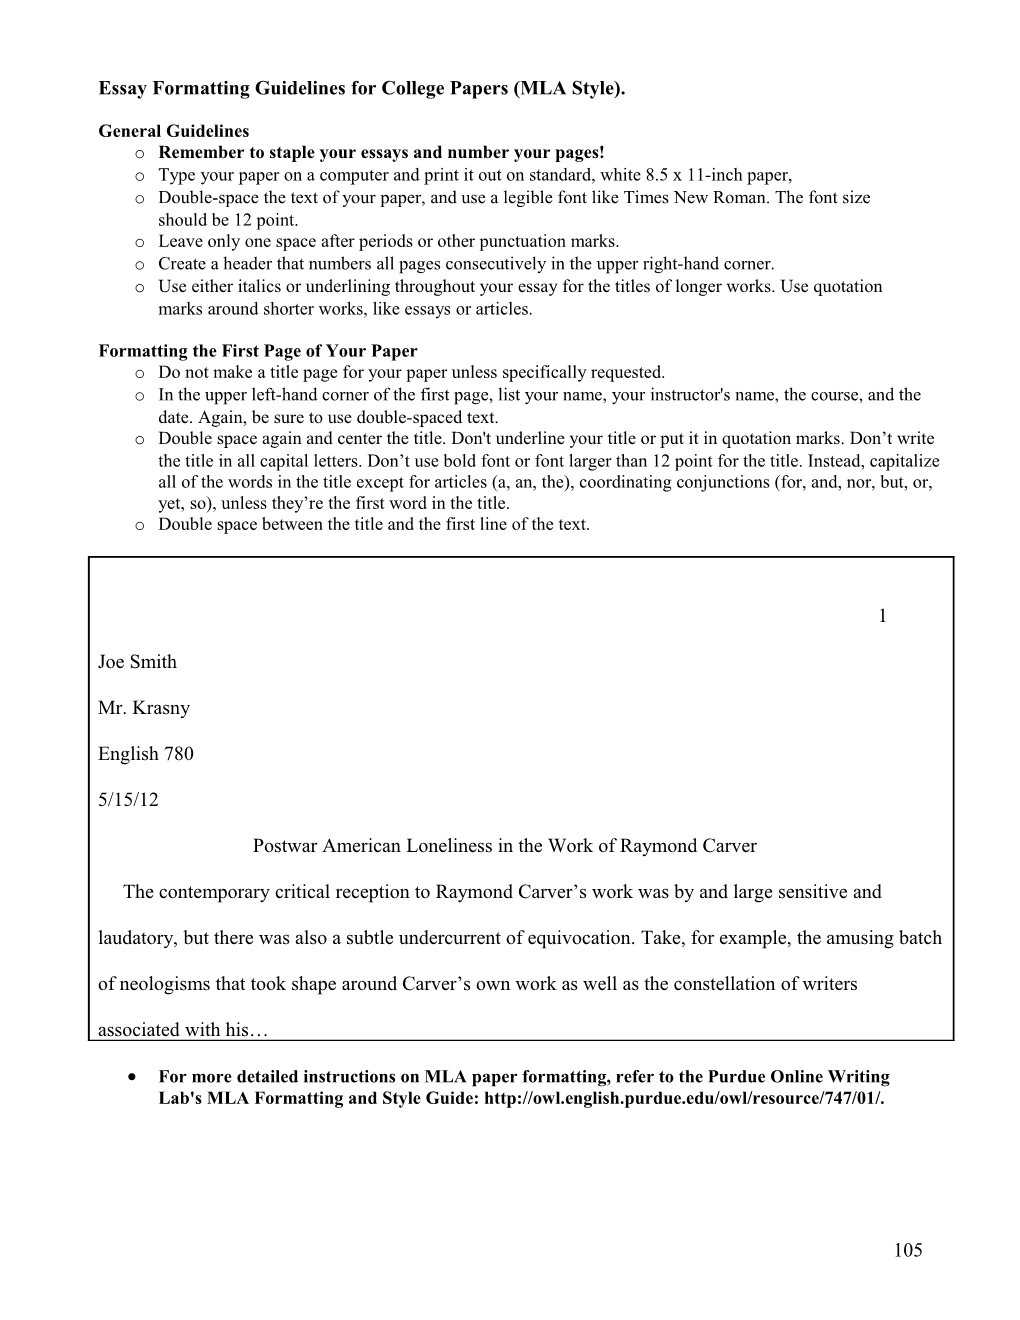 Essay Formatting Guidelines for College Papers (MLA Style)